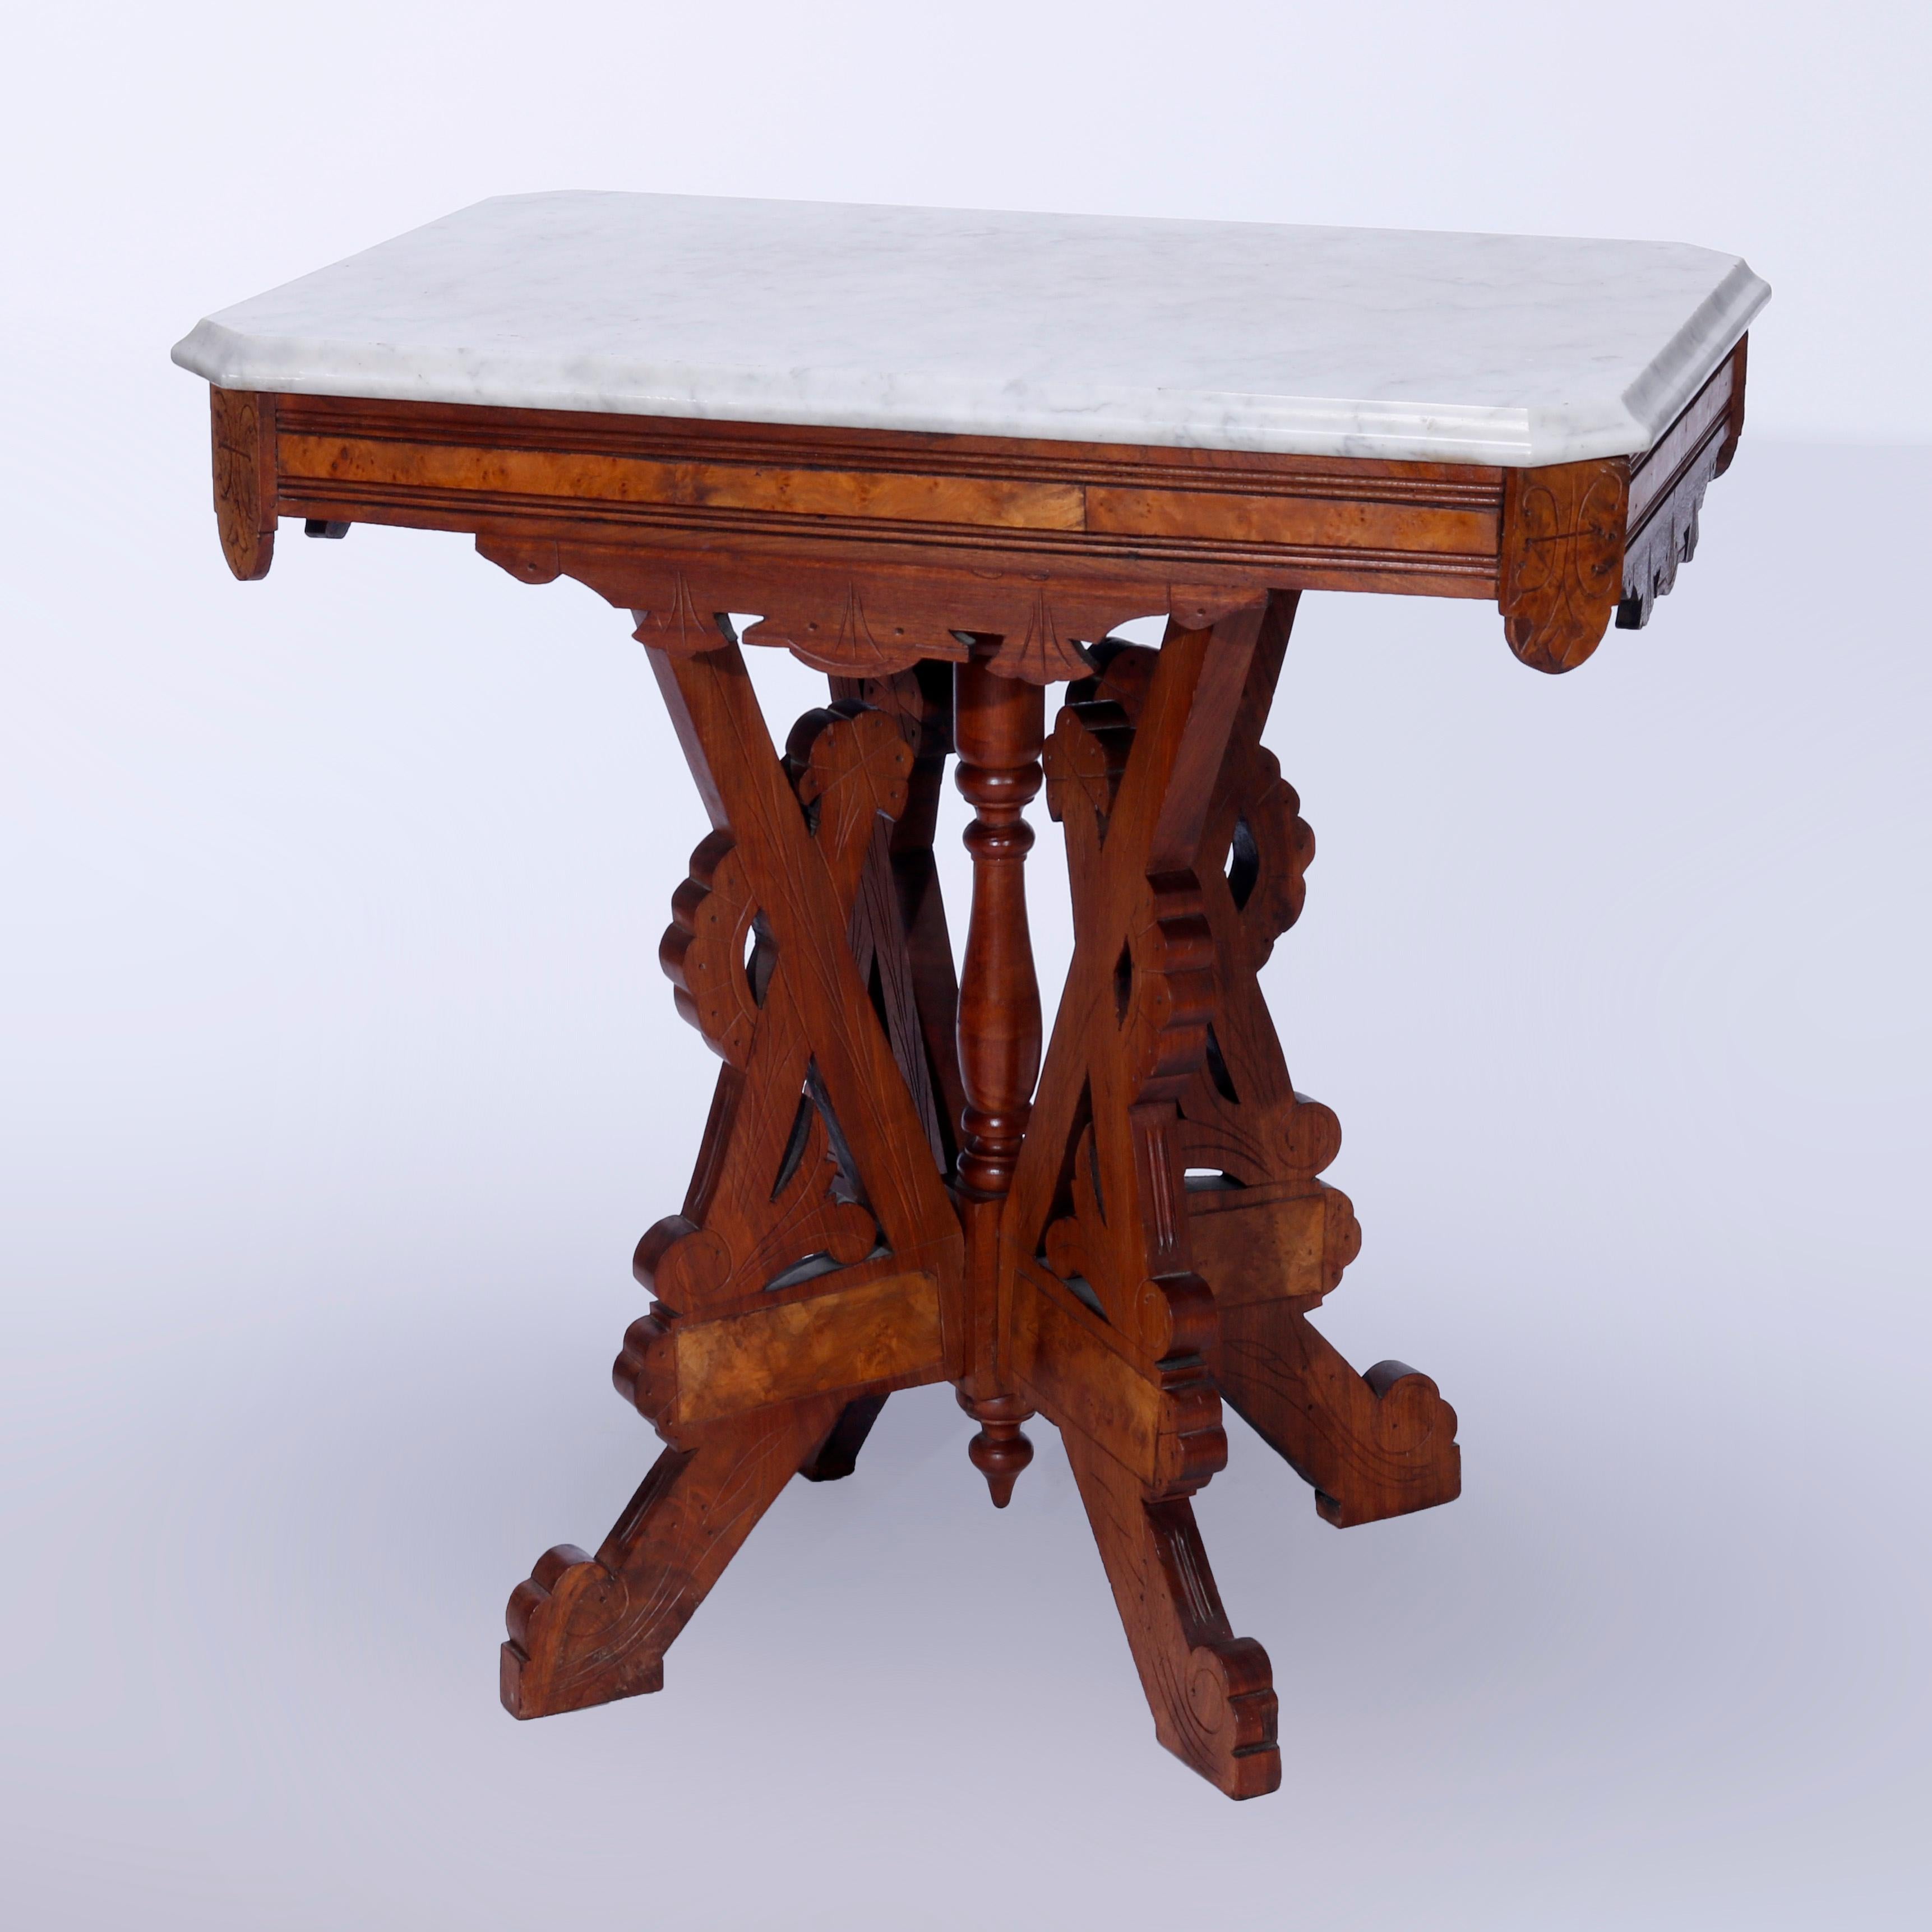 An antique Eastlake parlor table offers beveled clip-corner top over a walnut base having burl inset, shaped skirt and incised scroll decoration, raised on cut-out legs with central turned column and lower drop finial, c1890

Measures - 28.5''H x